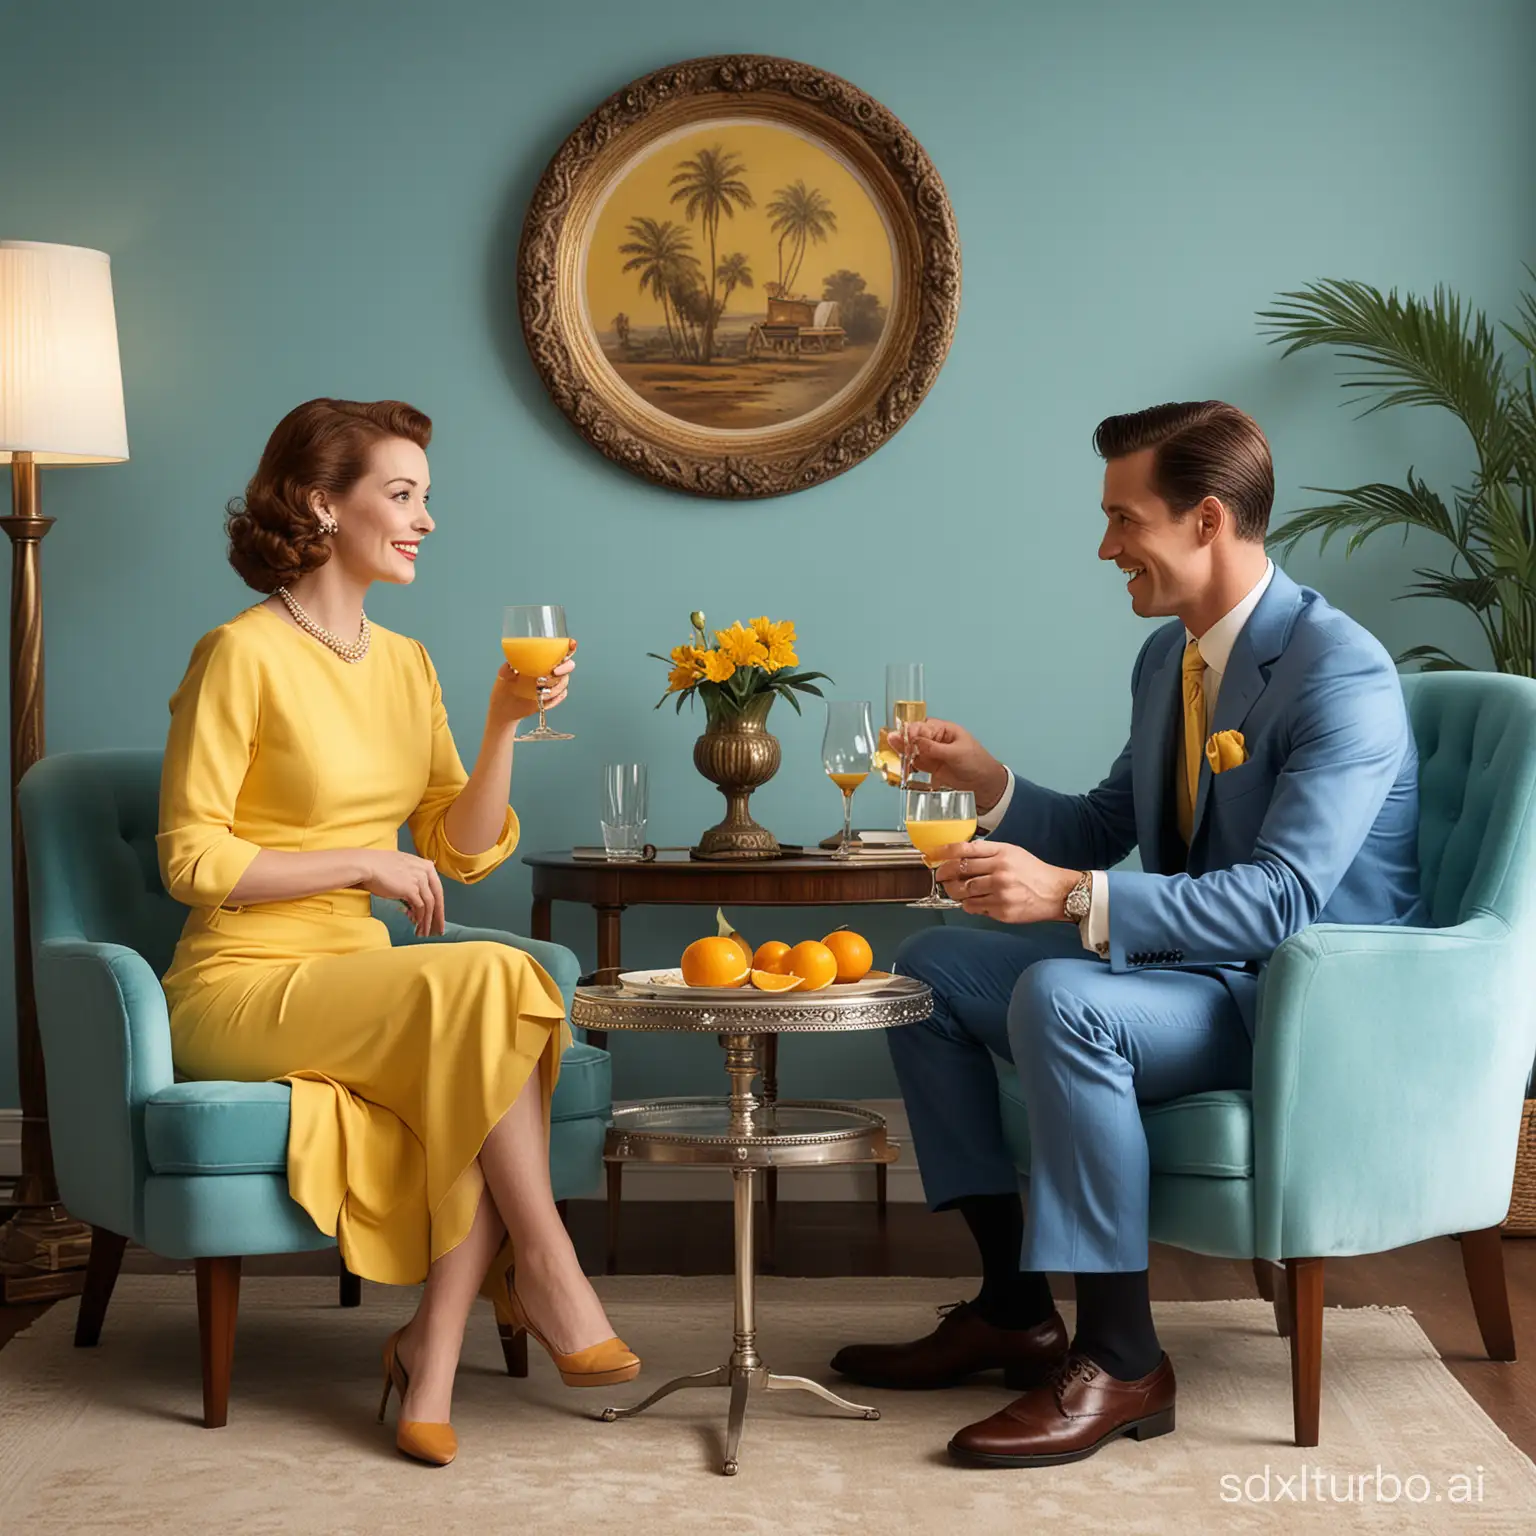 A 1950s-style living room scene depicted in vibrant colors, with a sophisticated and cheerful ambiance. The room has pastel blue walls, with elegant vintage decor including framed art, decorative wooden wall elements, and a glass round table with a reflective surface. On the table, a large ornate silver serving pot and a fancy stemmed glass filled with a yellow beverage, exuding a sense of luxury and a bygone era. Two stylishly dressed individuals, a man in a sharp blue suit and a woman in an elegant yellow dress, are sitting comfortably in mid-century modern blue chairs, engaging in a lively conversation and toasting with orange juice in their hands.
The woman is on the right and the man on the left